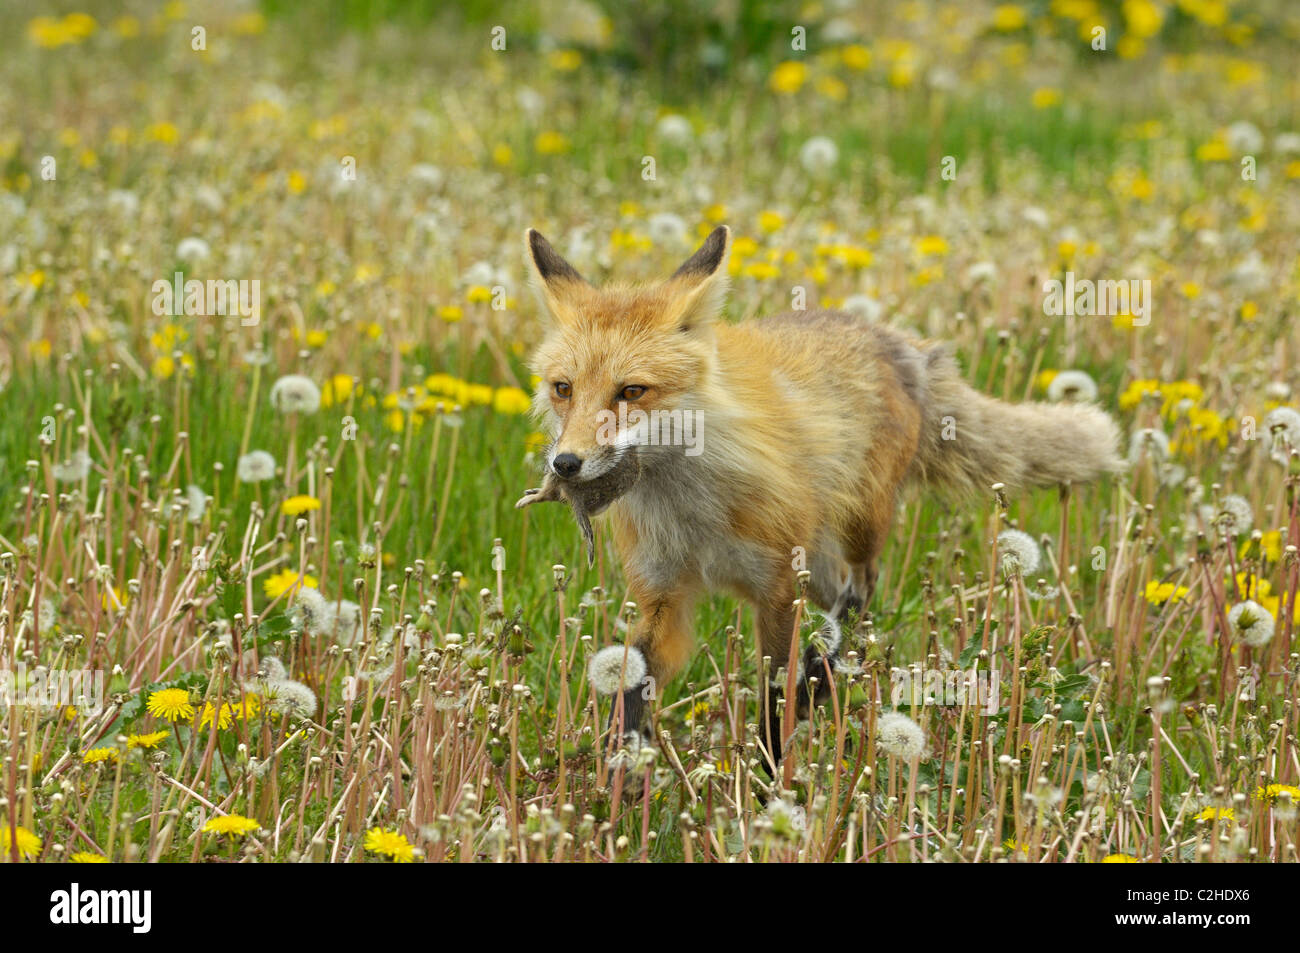 A red fox trotting through a field of dandelions with a ground squirrel in its mouth. Stock Photo